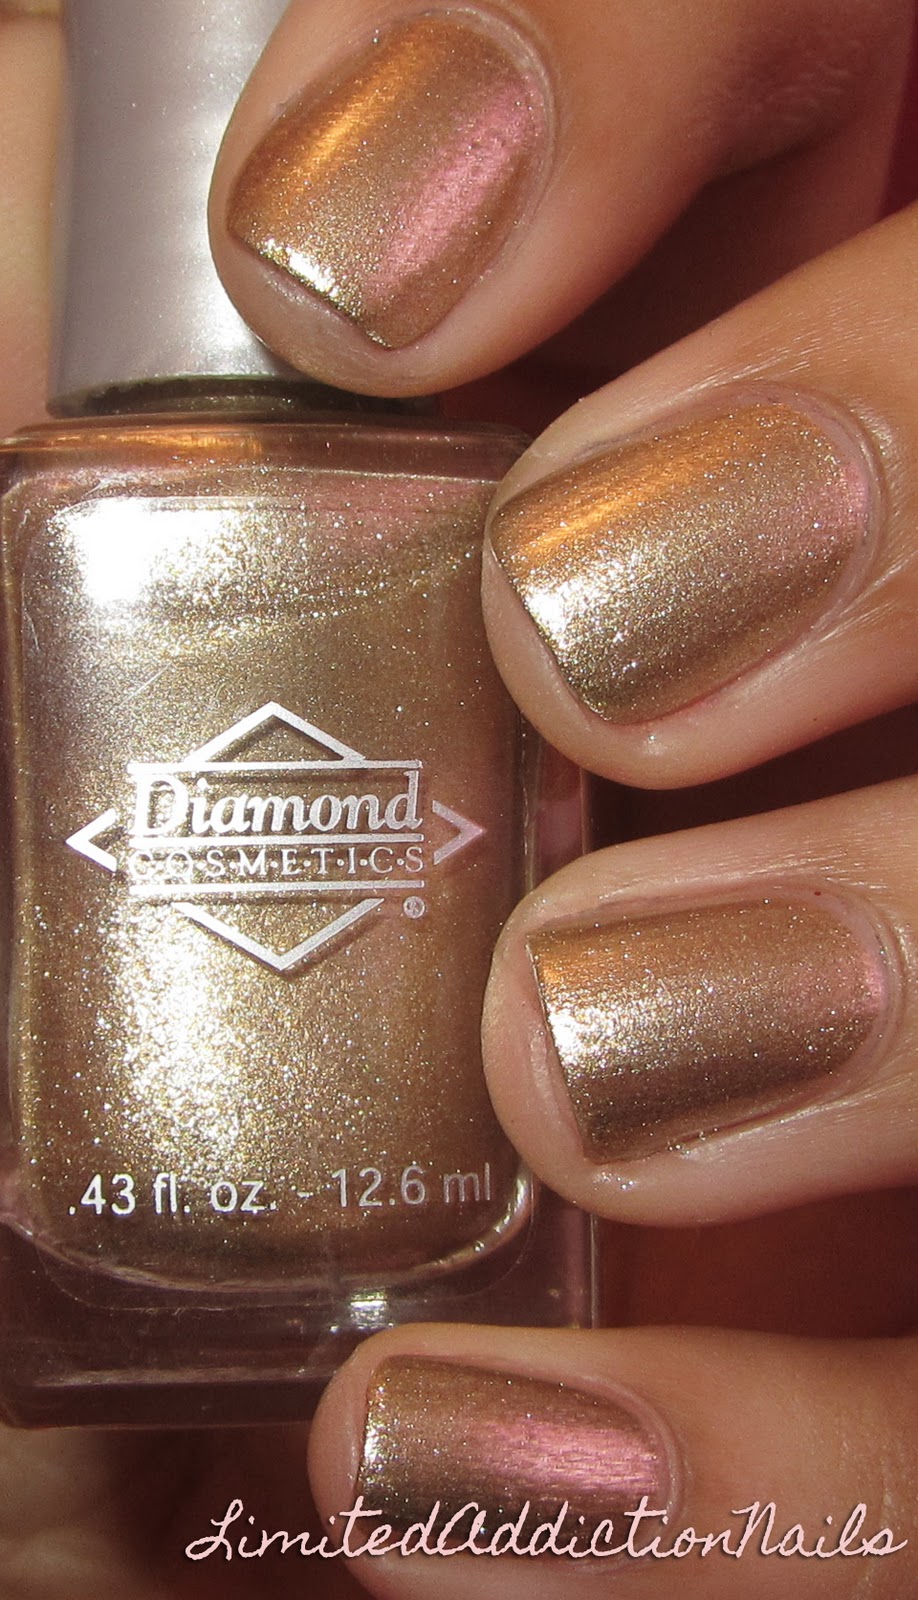 This is a nail polish from Diamond Cosmetics and let me tell you it's great!